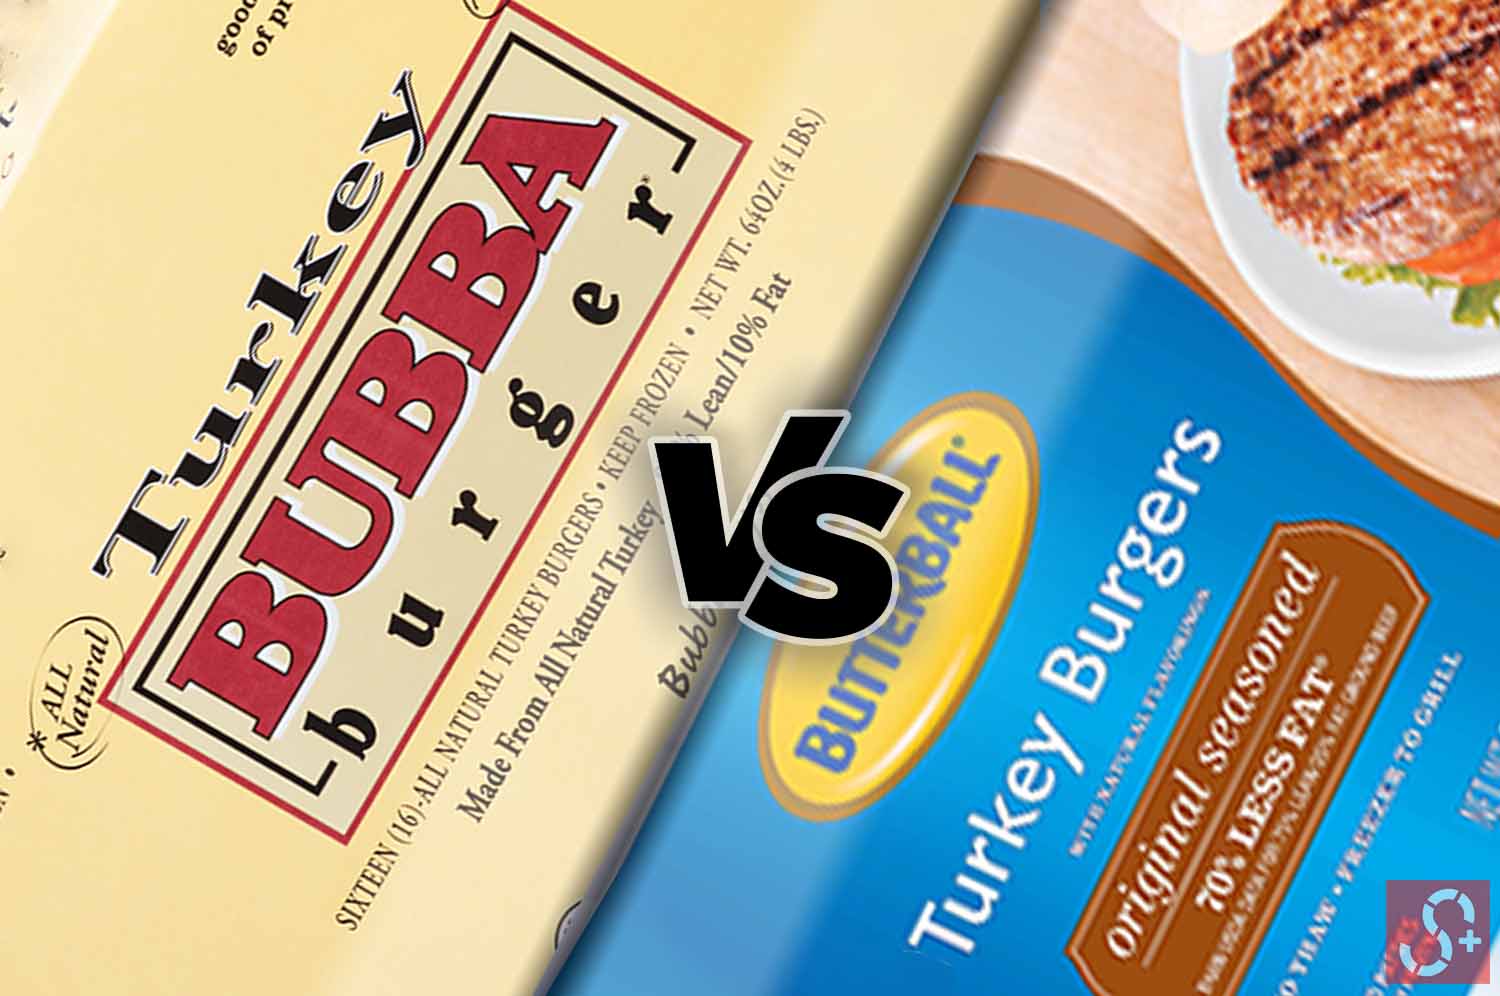 Comparison between the box of Butterball Burger and Bubba Turkey Burger